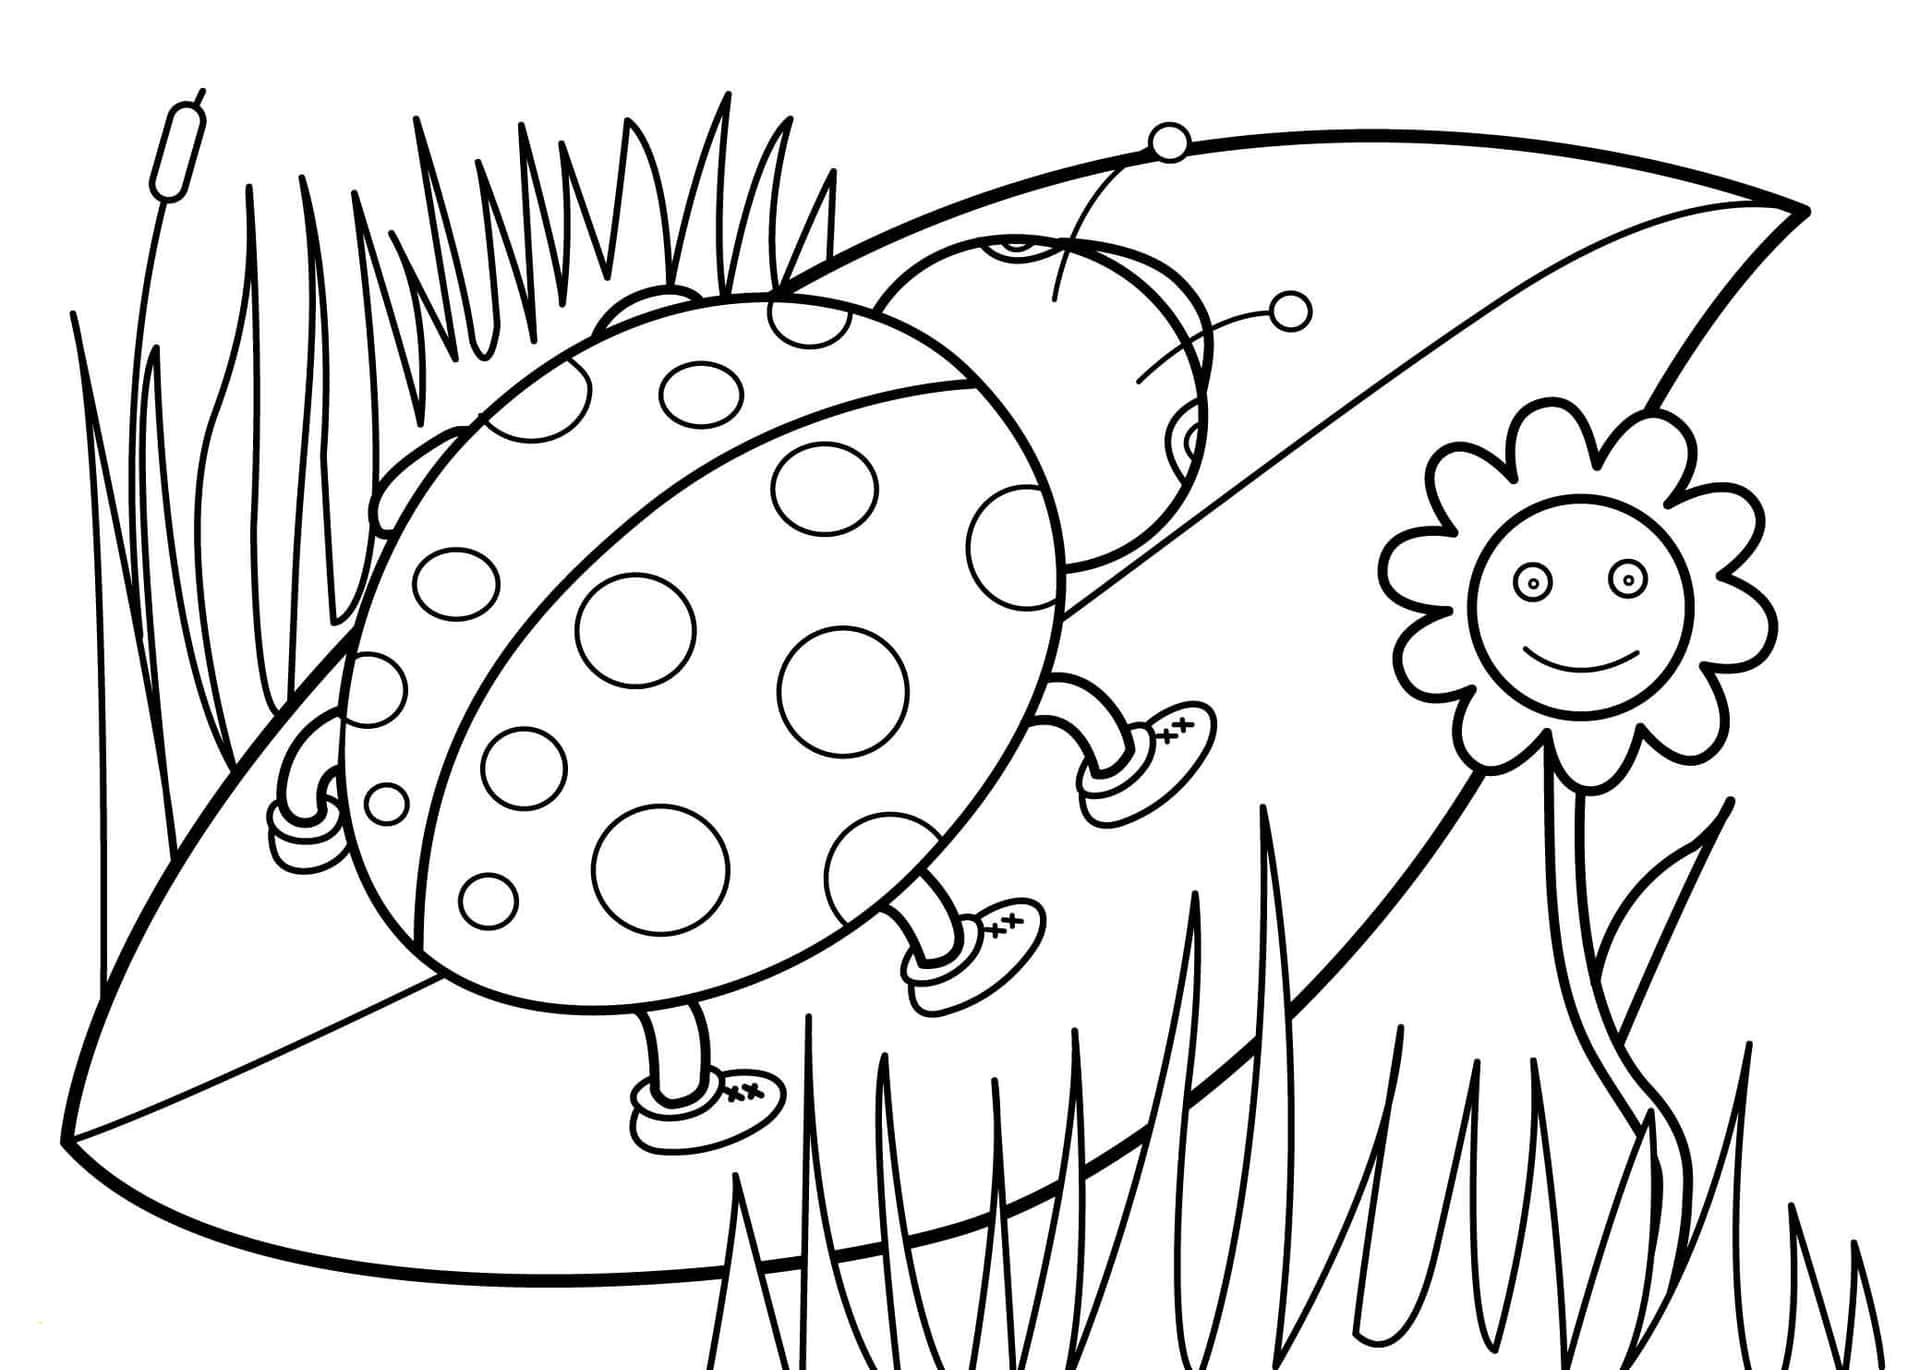 Explore Nature with Spring Coloring Pictures